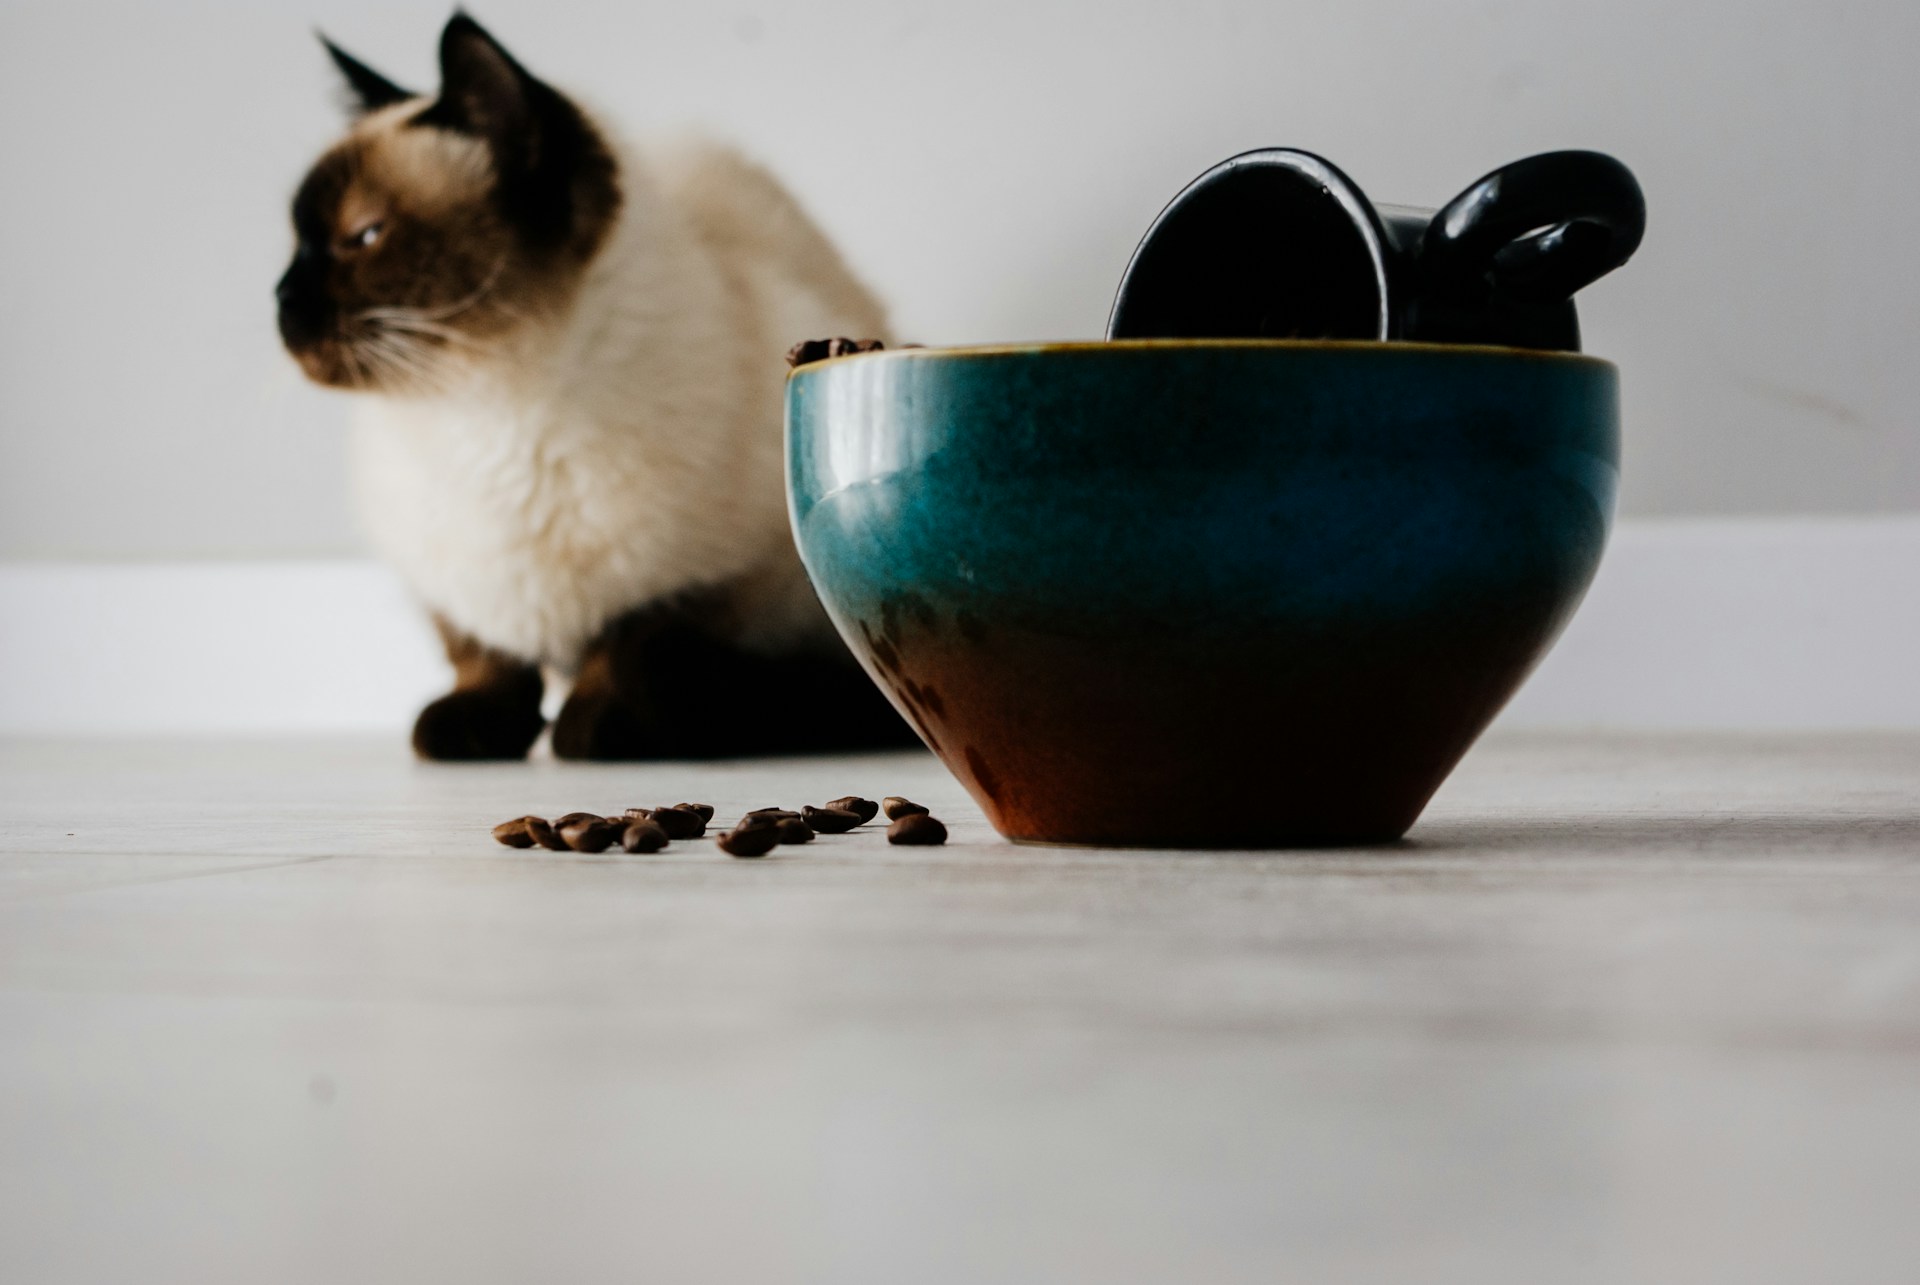 A Siamese cat sitting next to a coffee mug with beans on the ground